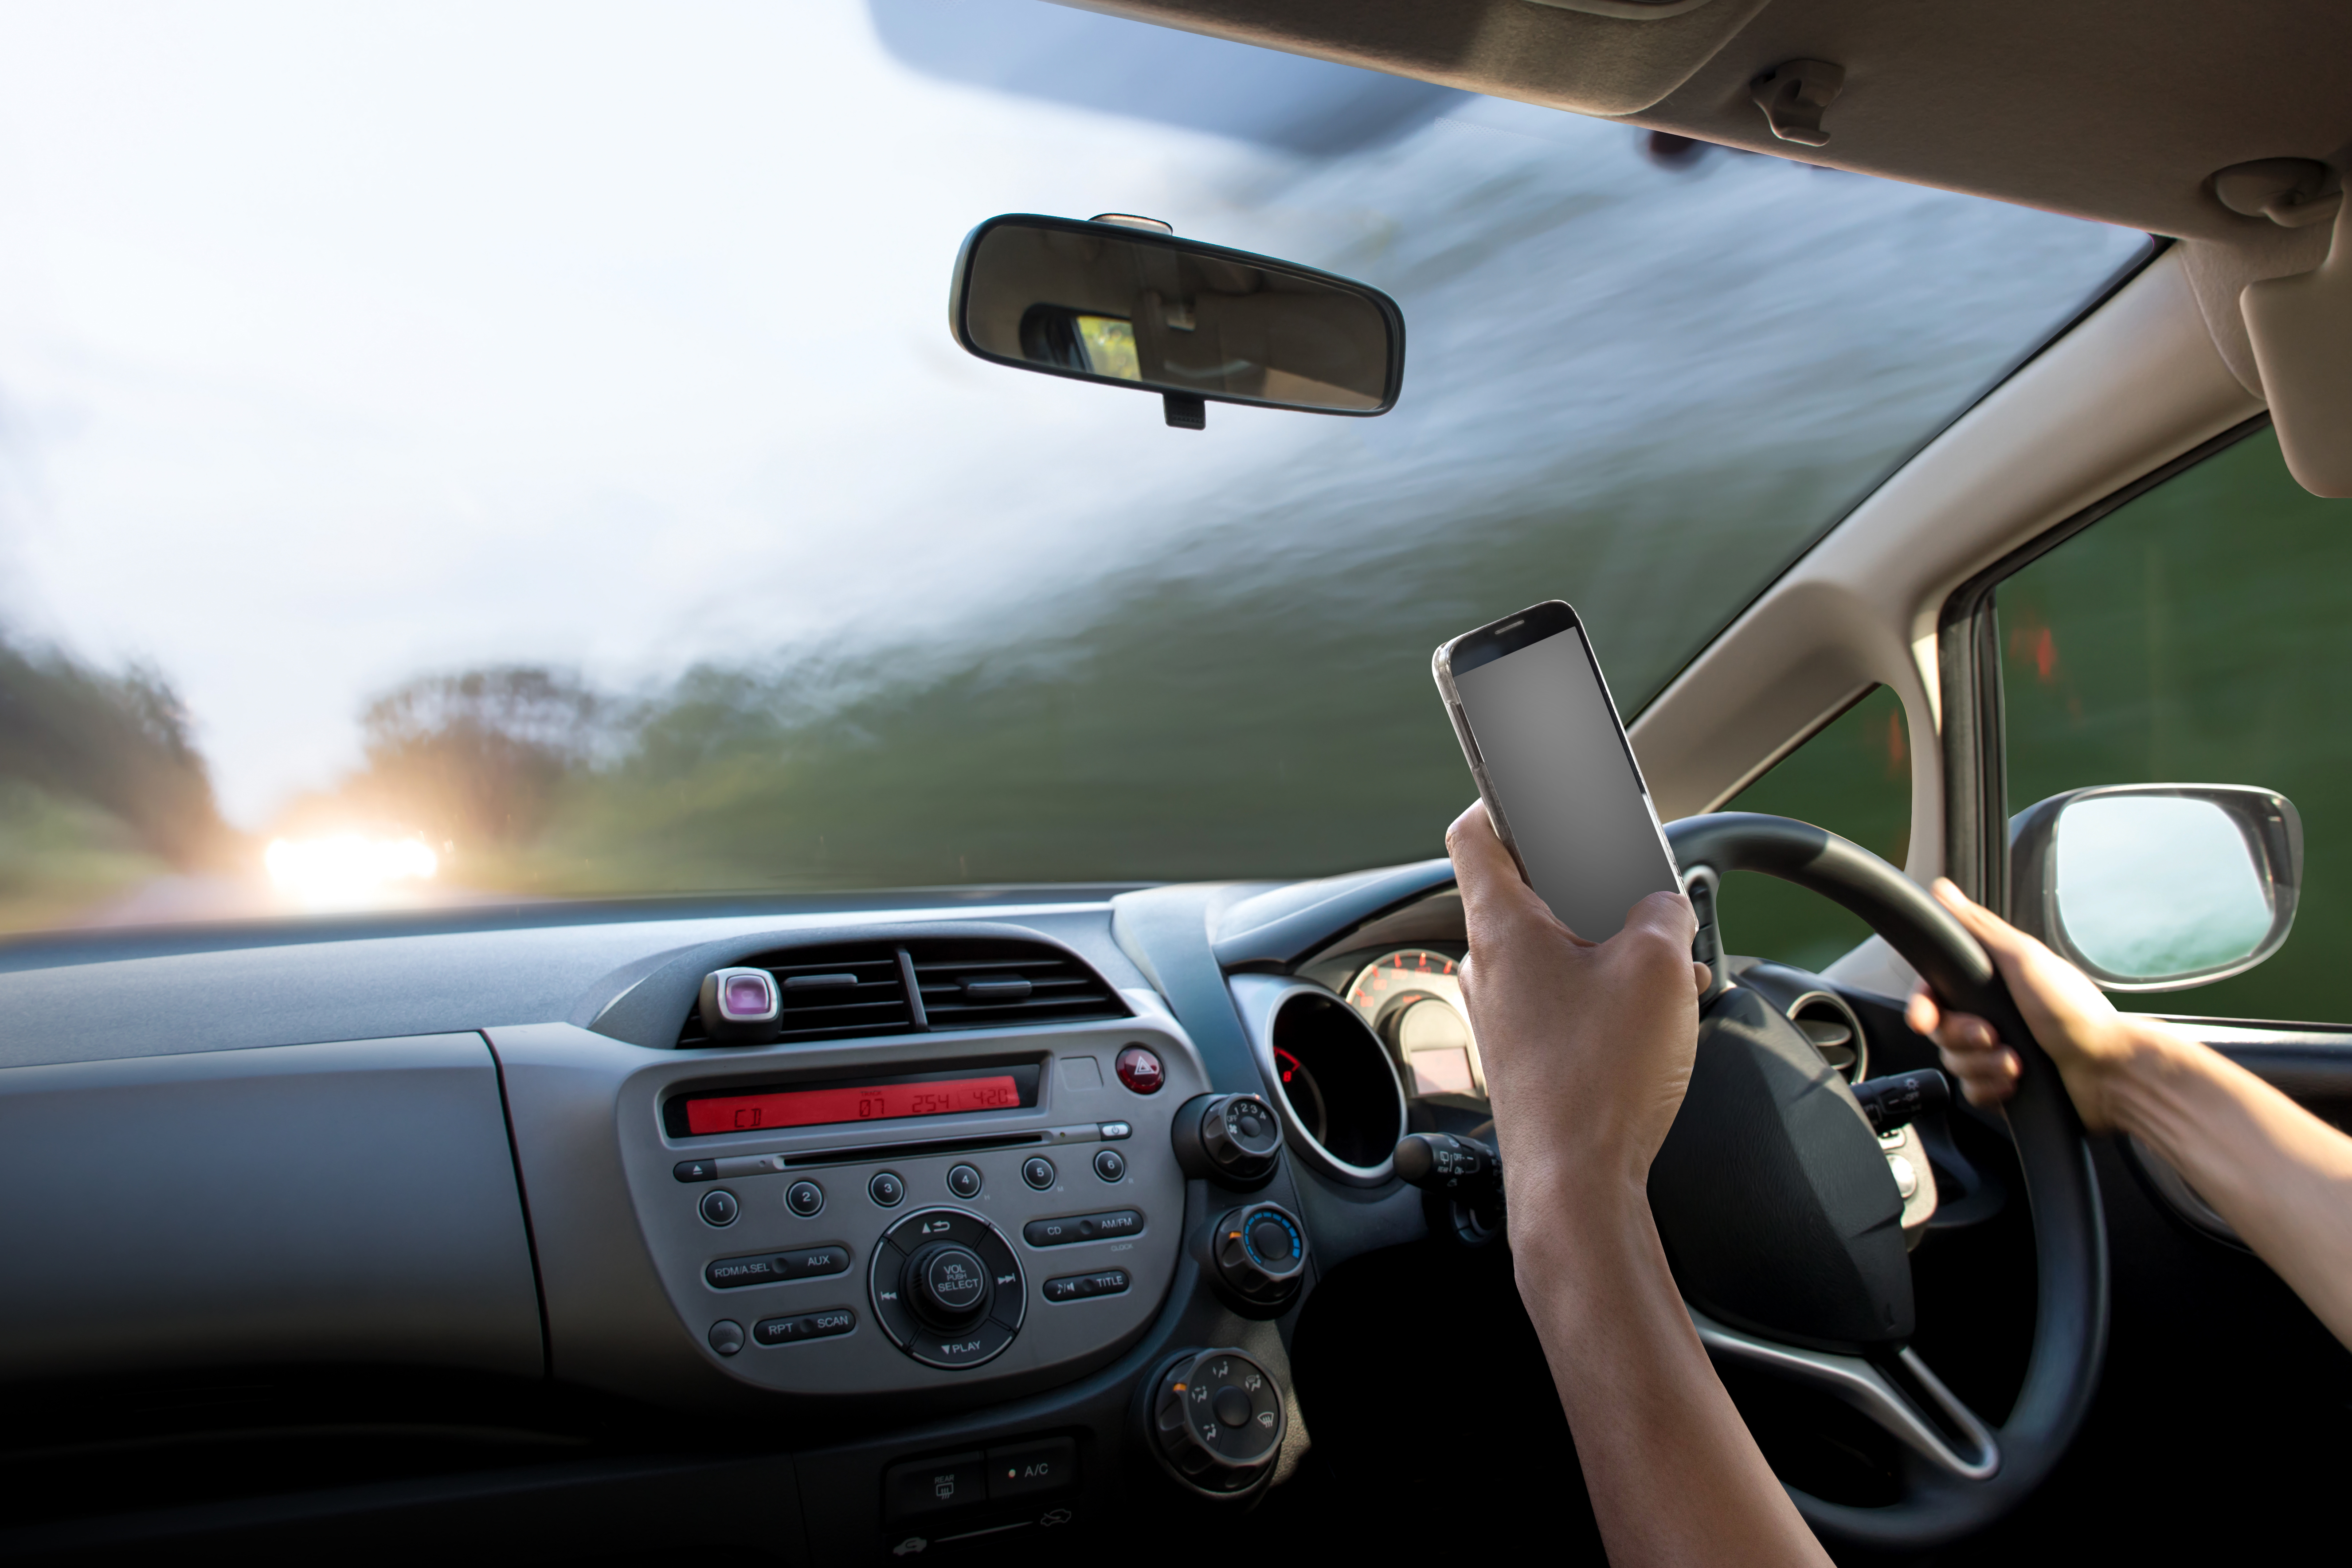 Mobile phone fears top Maxxis driver safety survey